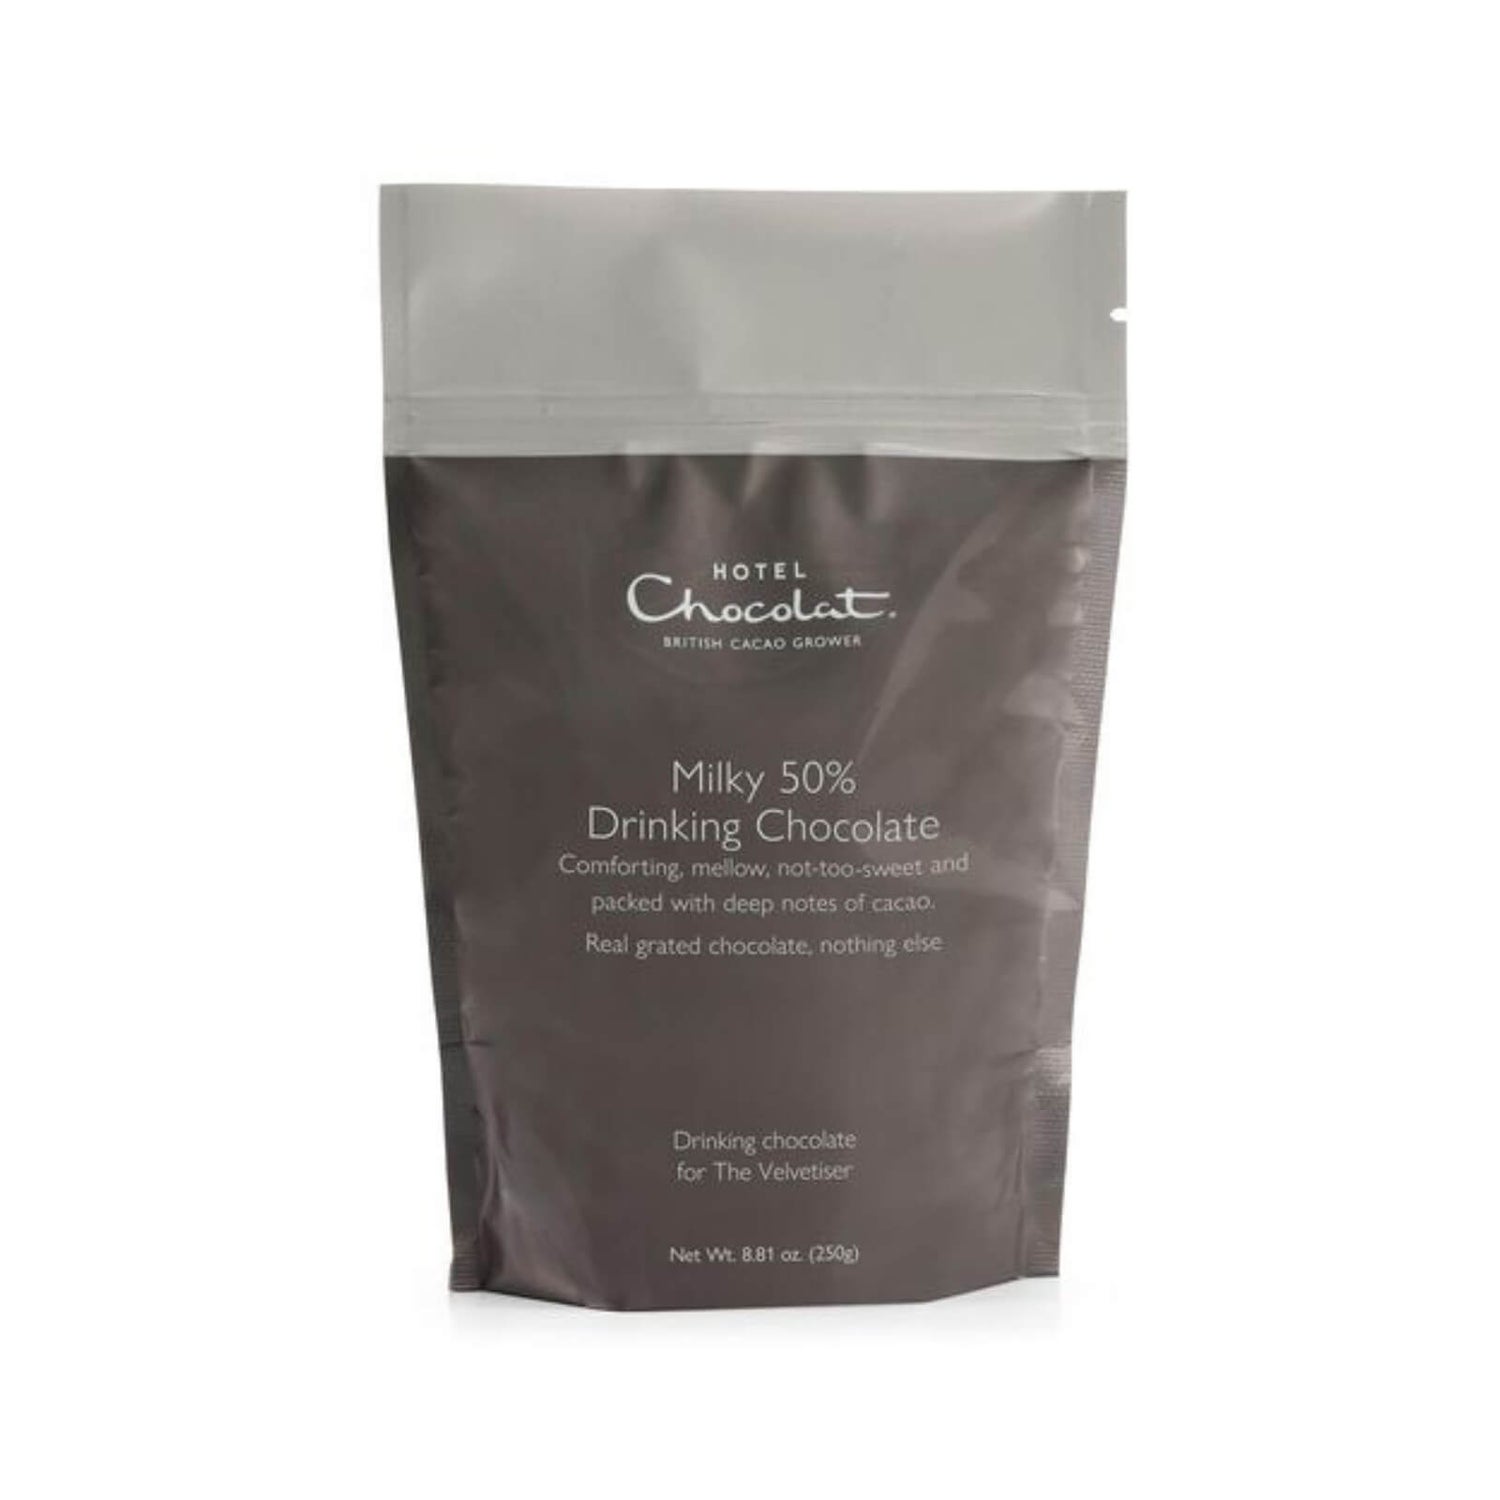 Milky 50% Hot Chocolate - 250g Pouch